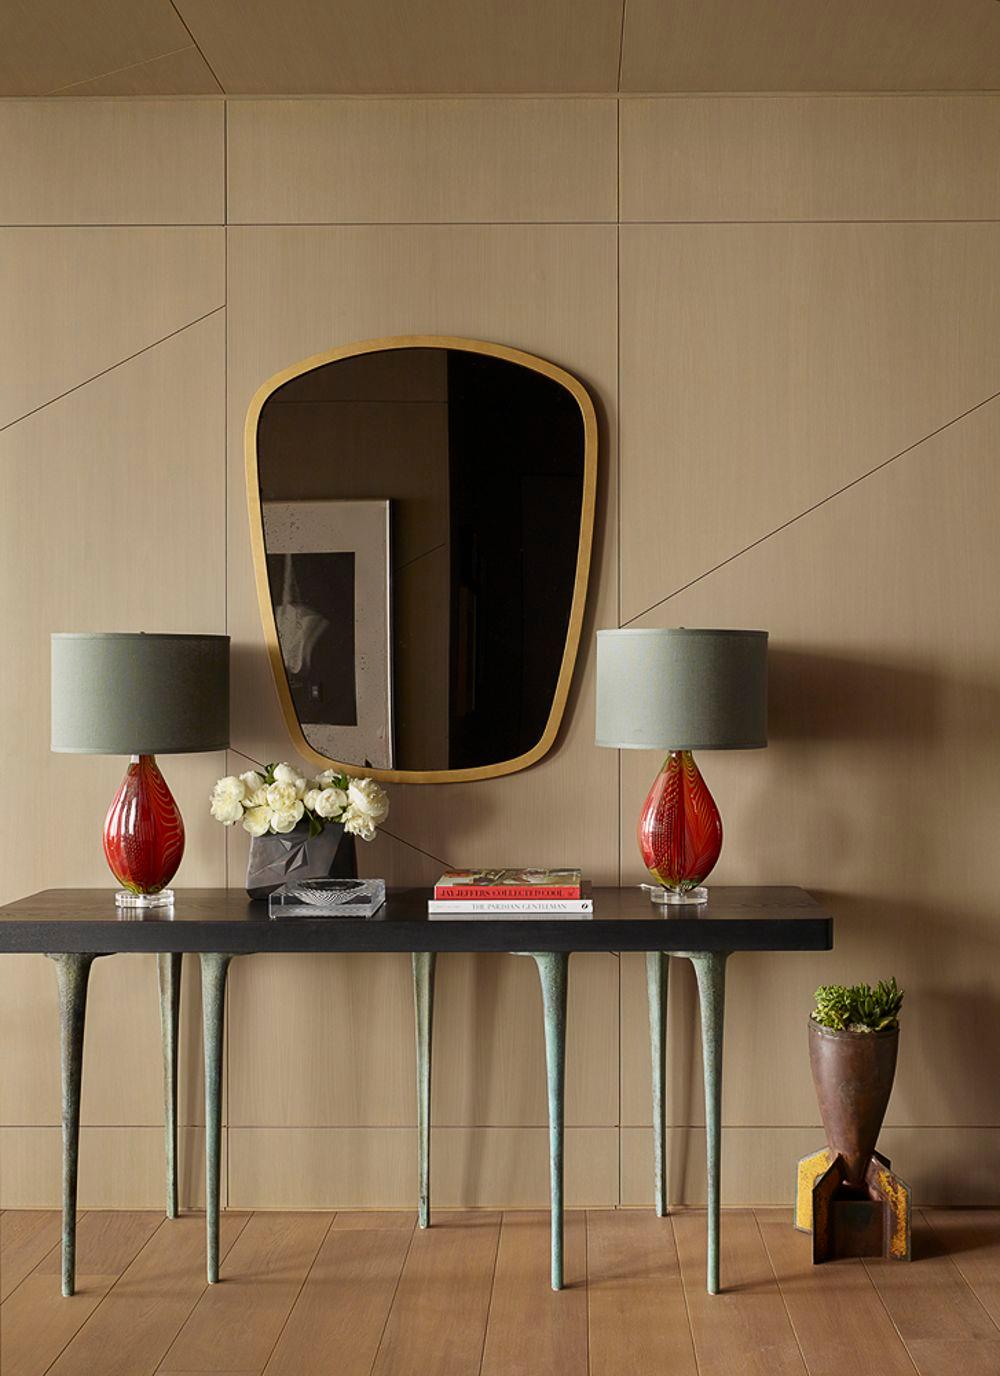 The Thicket Console is an elegant design that pairs fully customizable solid wood tabletops with slender cast metal legs. The tabletops are made to order at our studio in Chicago and are available in an extensive range of species and finishes,